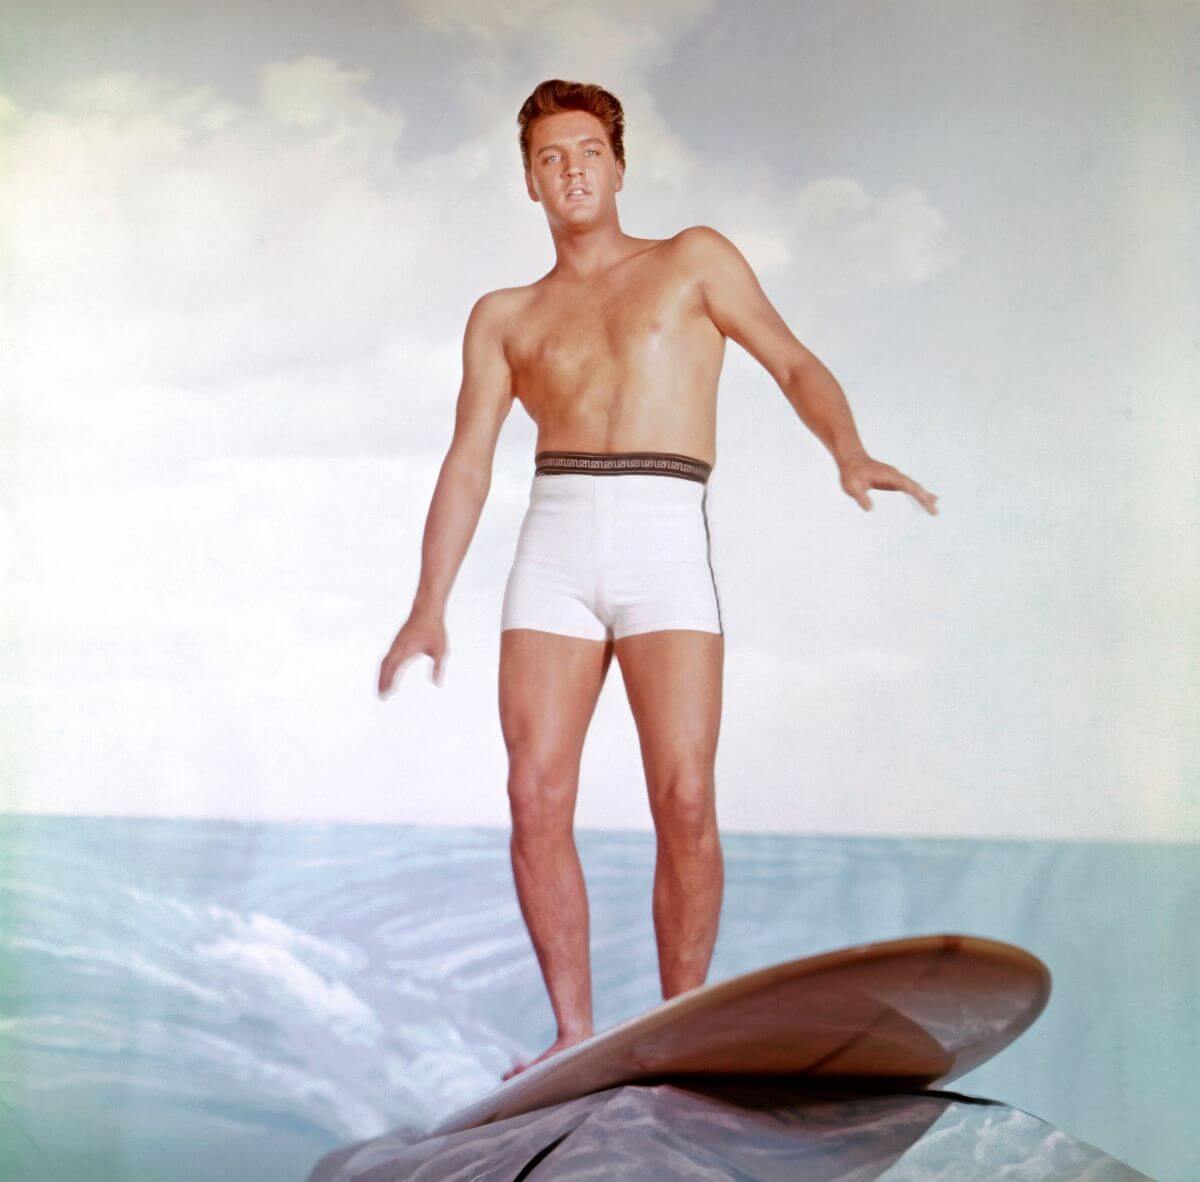 Elvis wears white swim trunks and stands on a surfboard for a publicity shot.